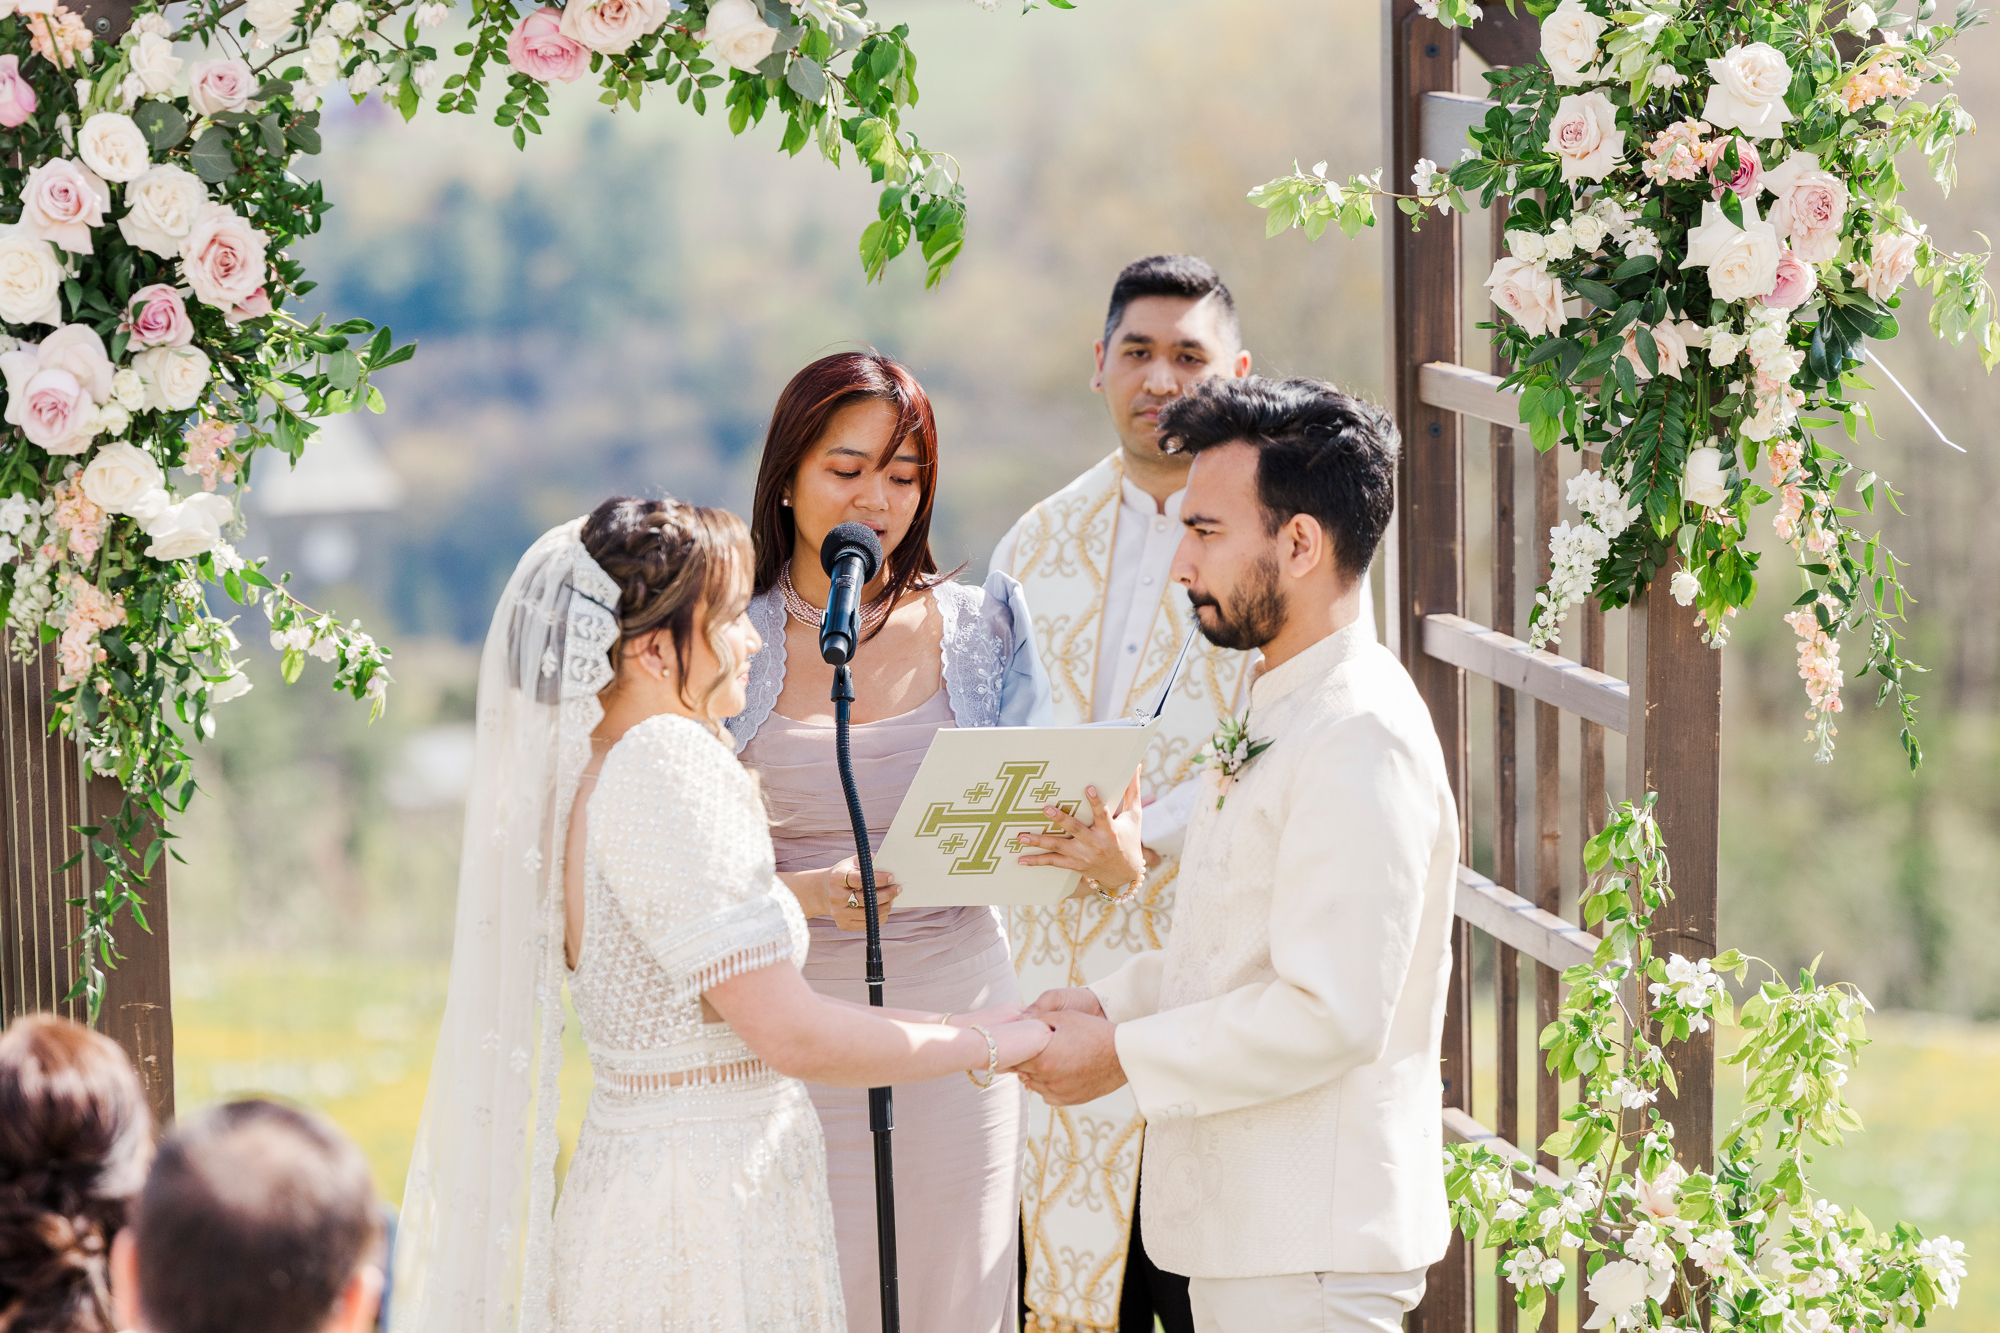 Authentic Seminary Hill Wedding in the Summertime